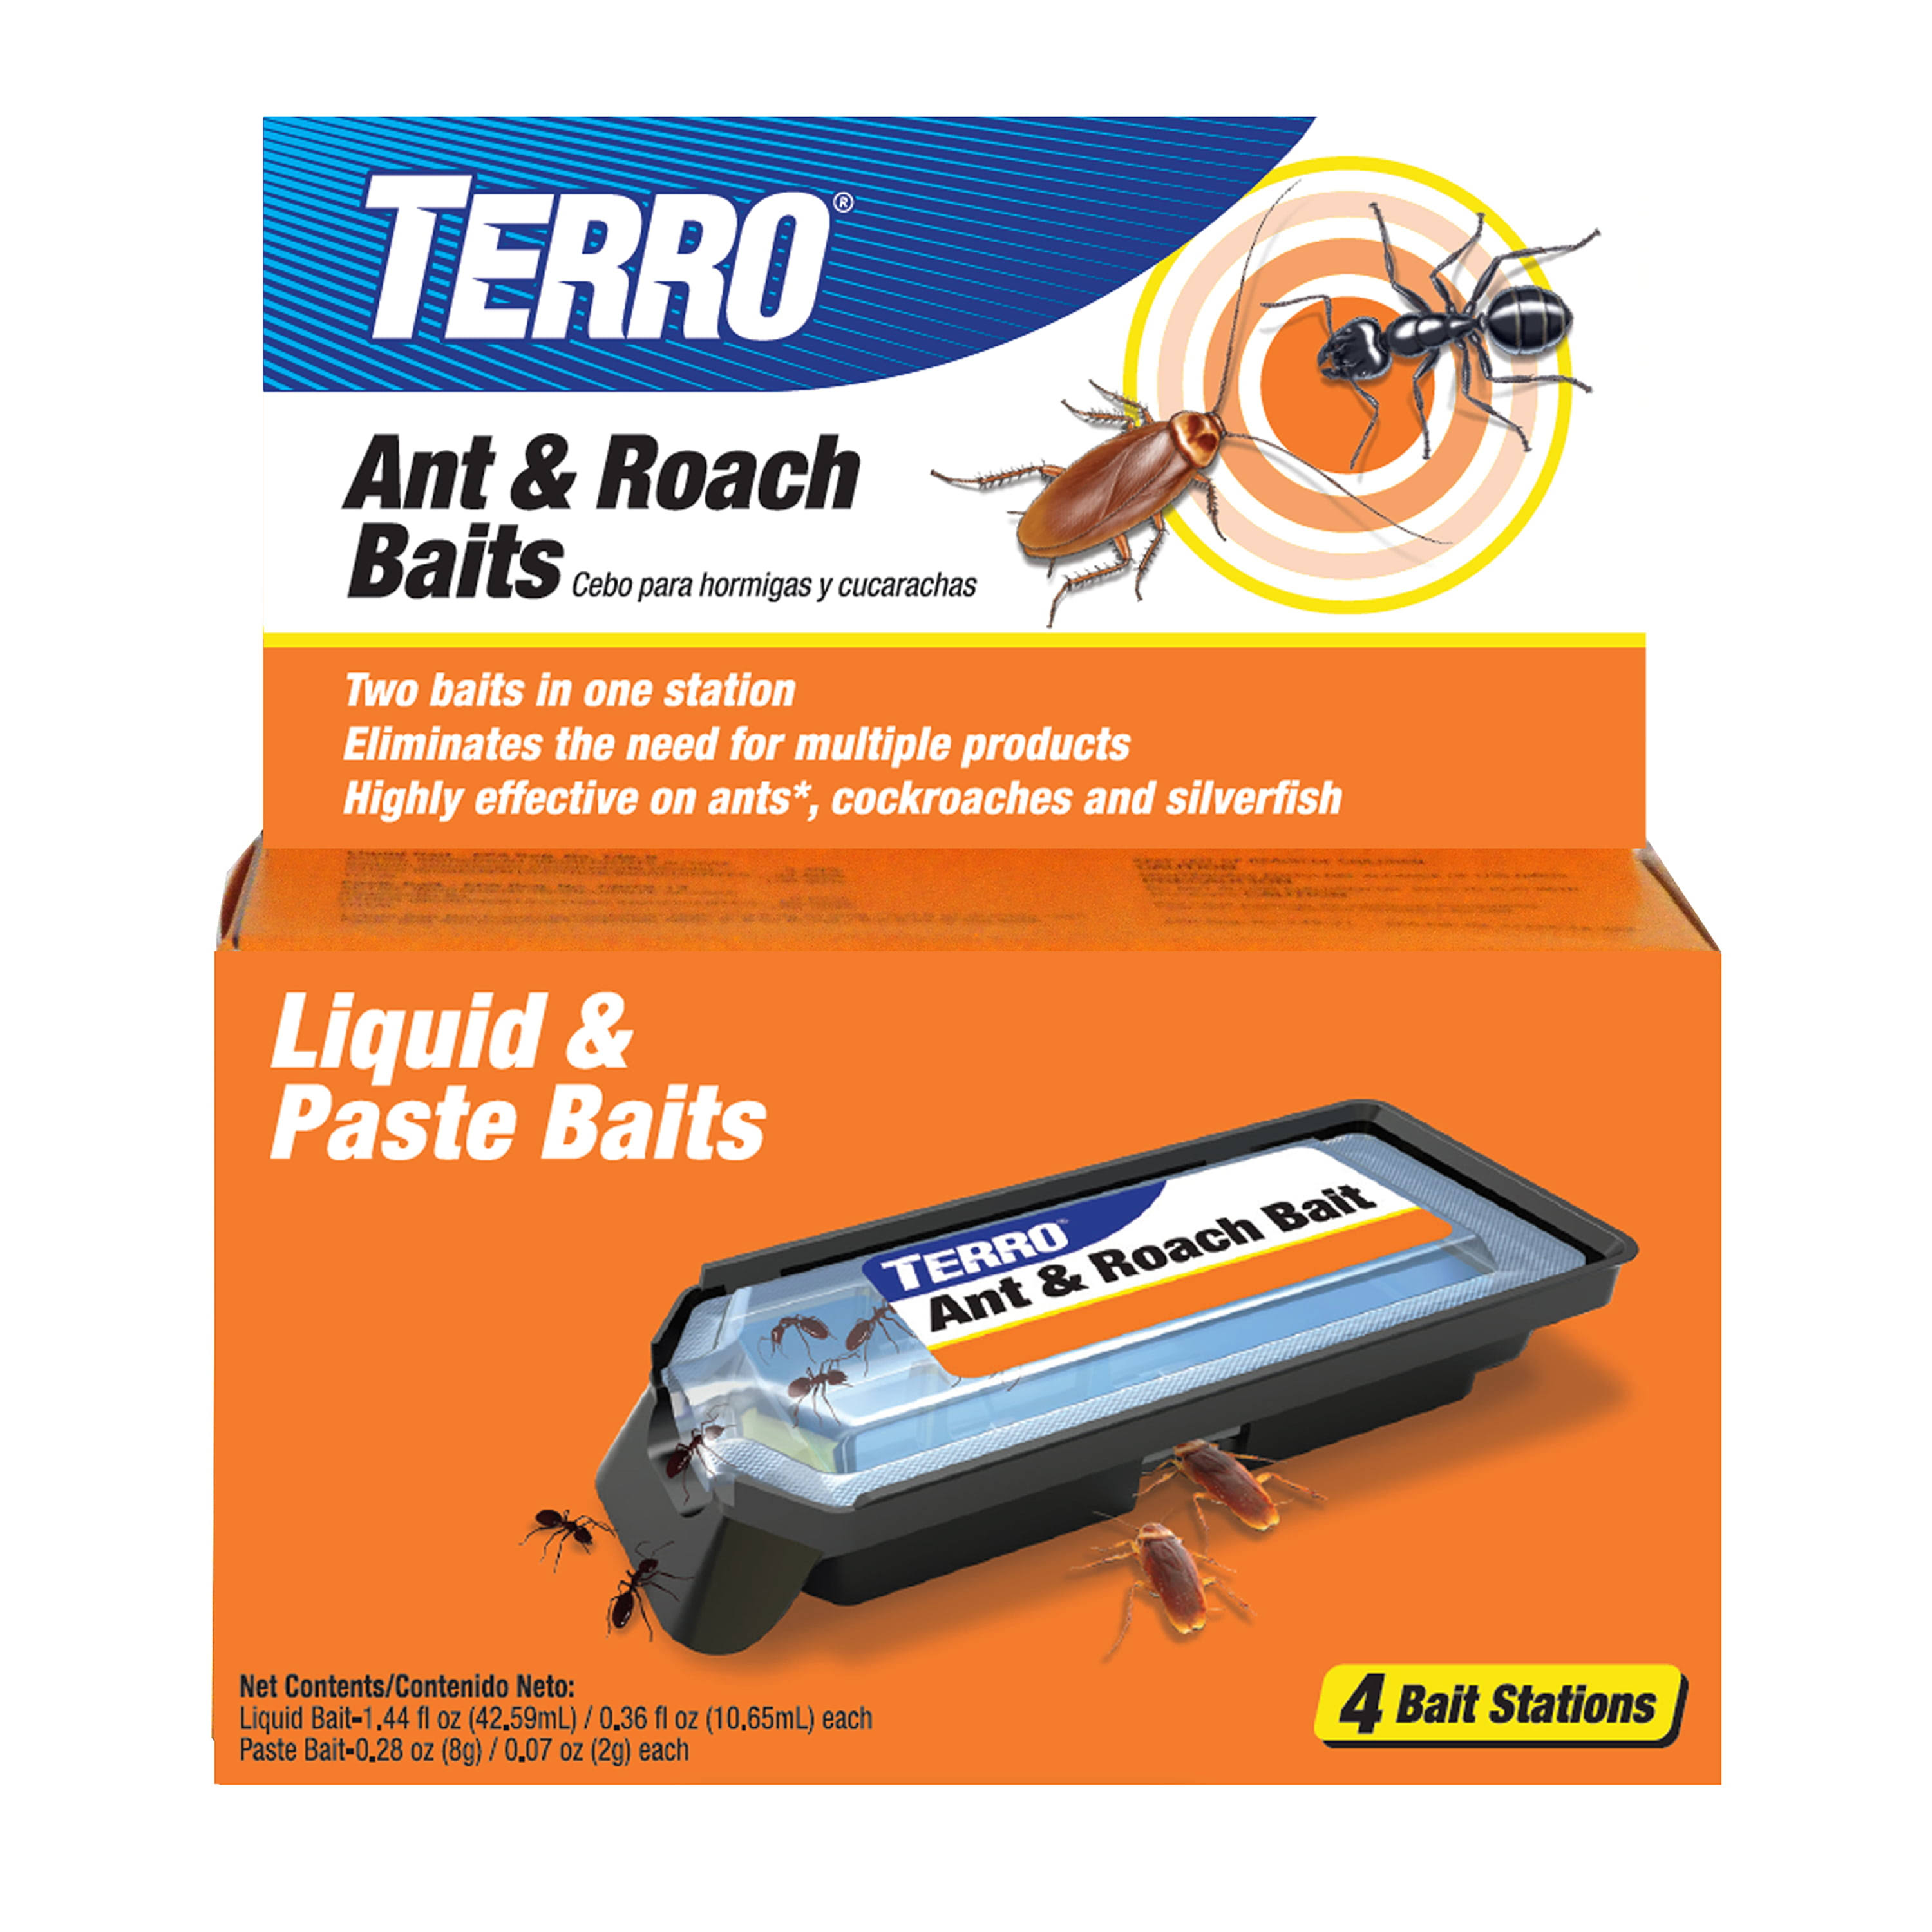 Terro T360 Ant and Roach Stations, 1 Pack Ant & Roach Baits, Black